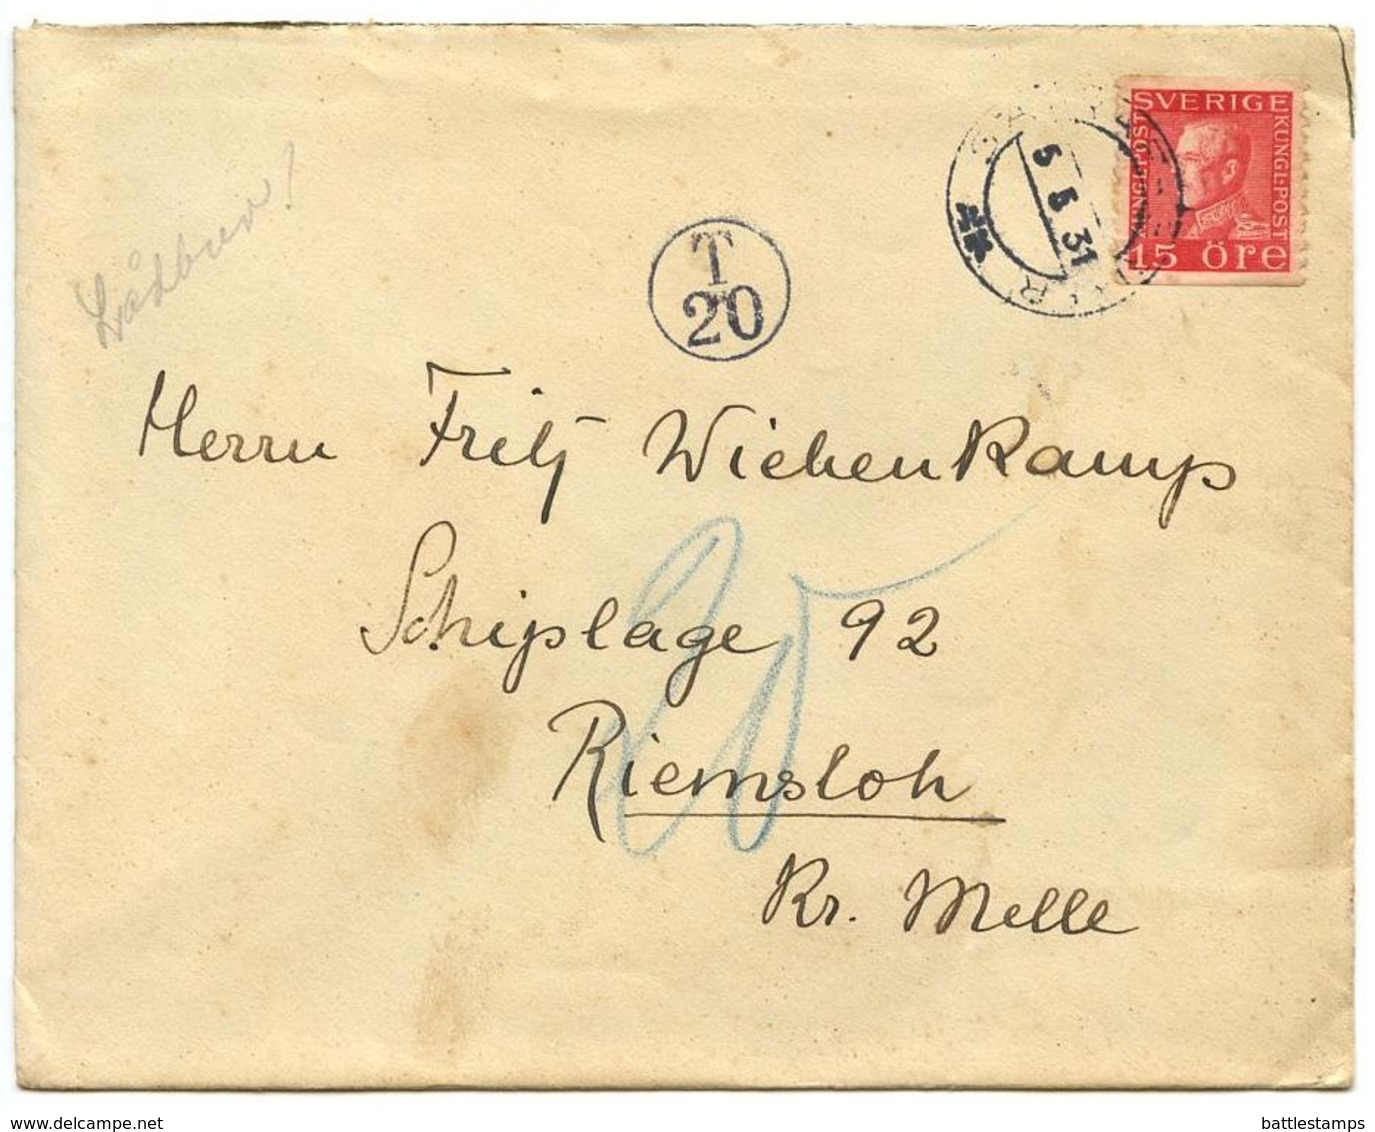 Sweden 1931 Cover Sätra Fabriker To Riemsloh, Kr. Melle, Germany, Postage Due - Lettres & Documents